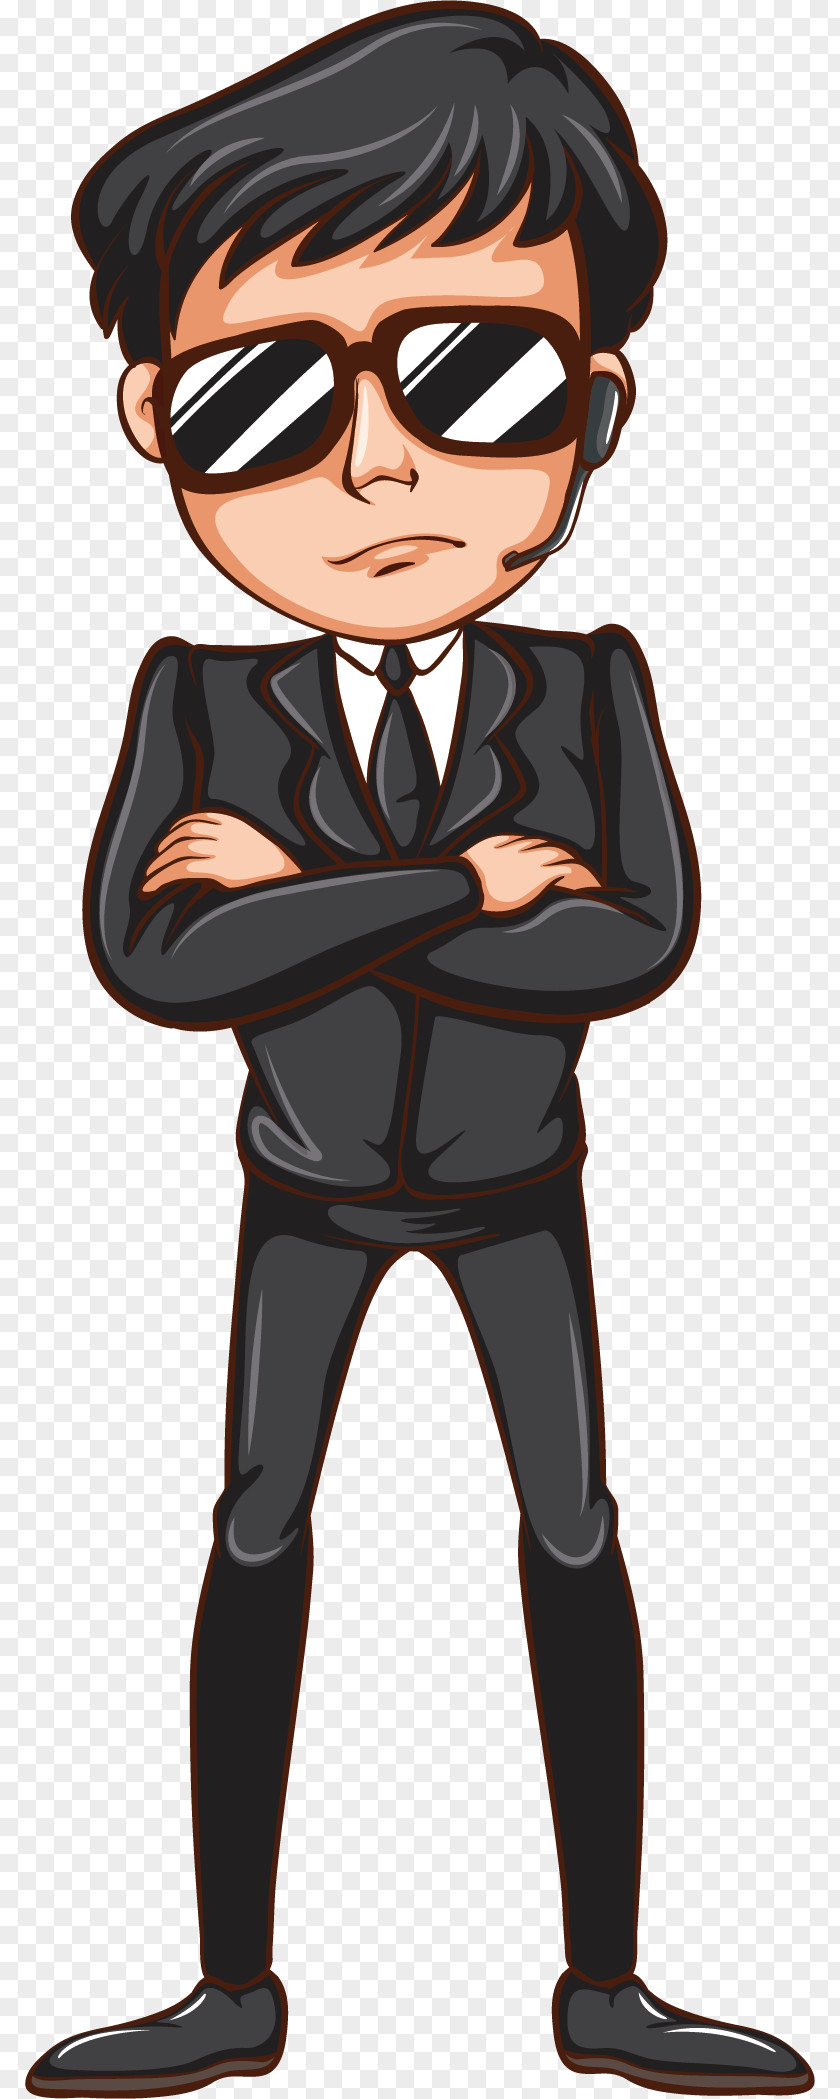 Wearing Sunglasses Security Drawing Illustration PNG